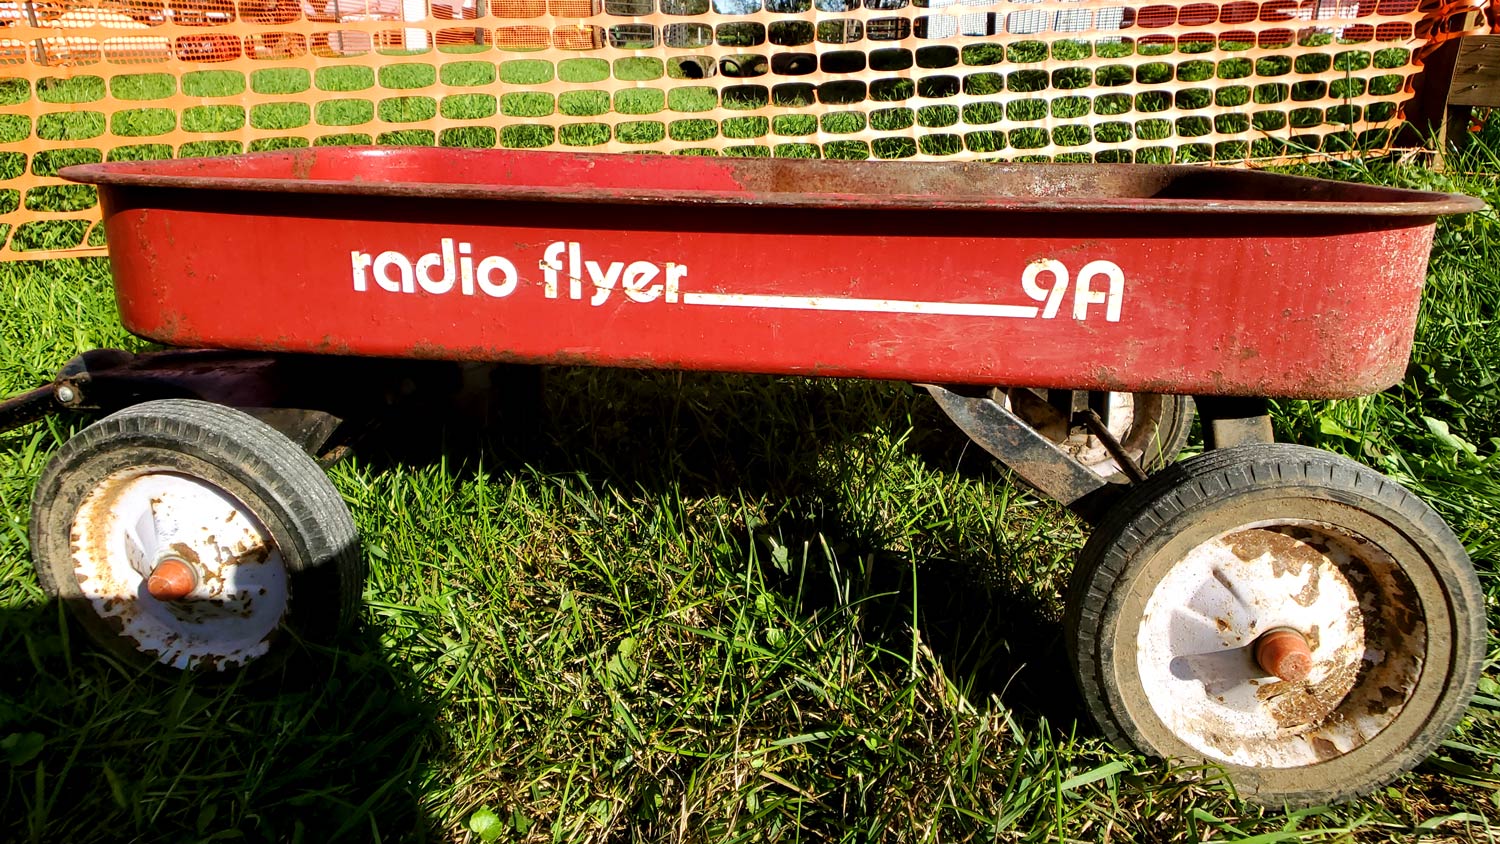 Radio Flyer 9A wagon at Cody's Farm and Orchard.